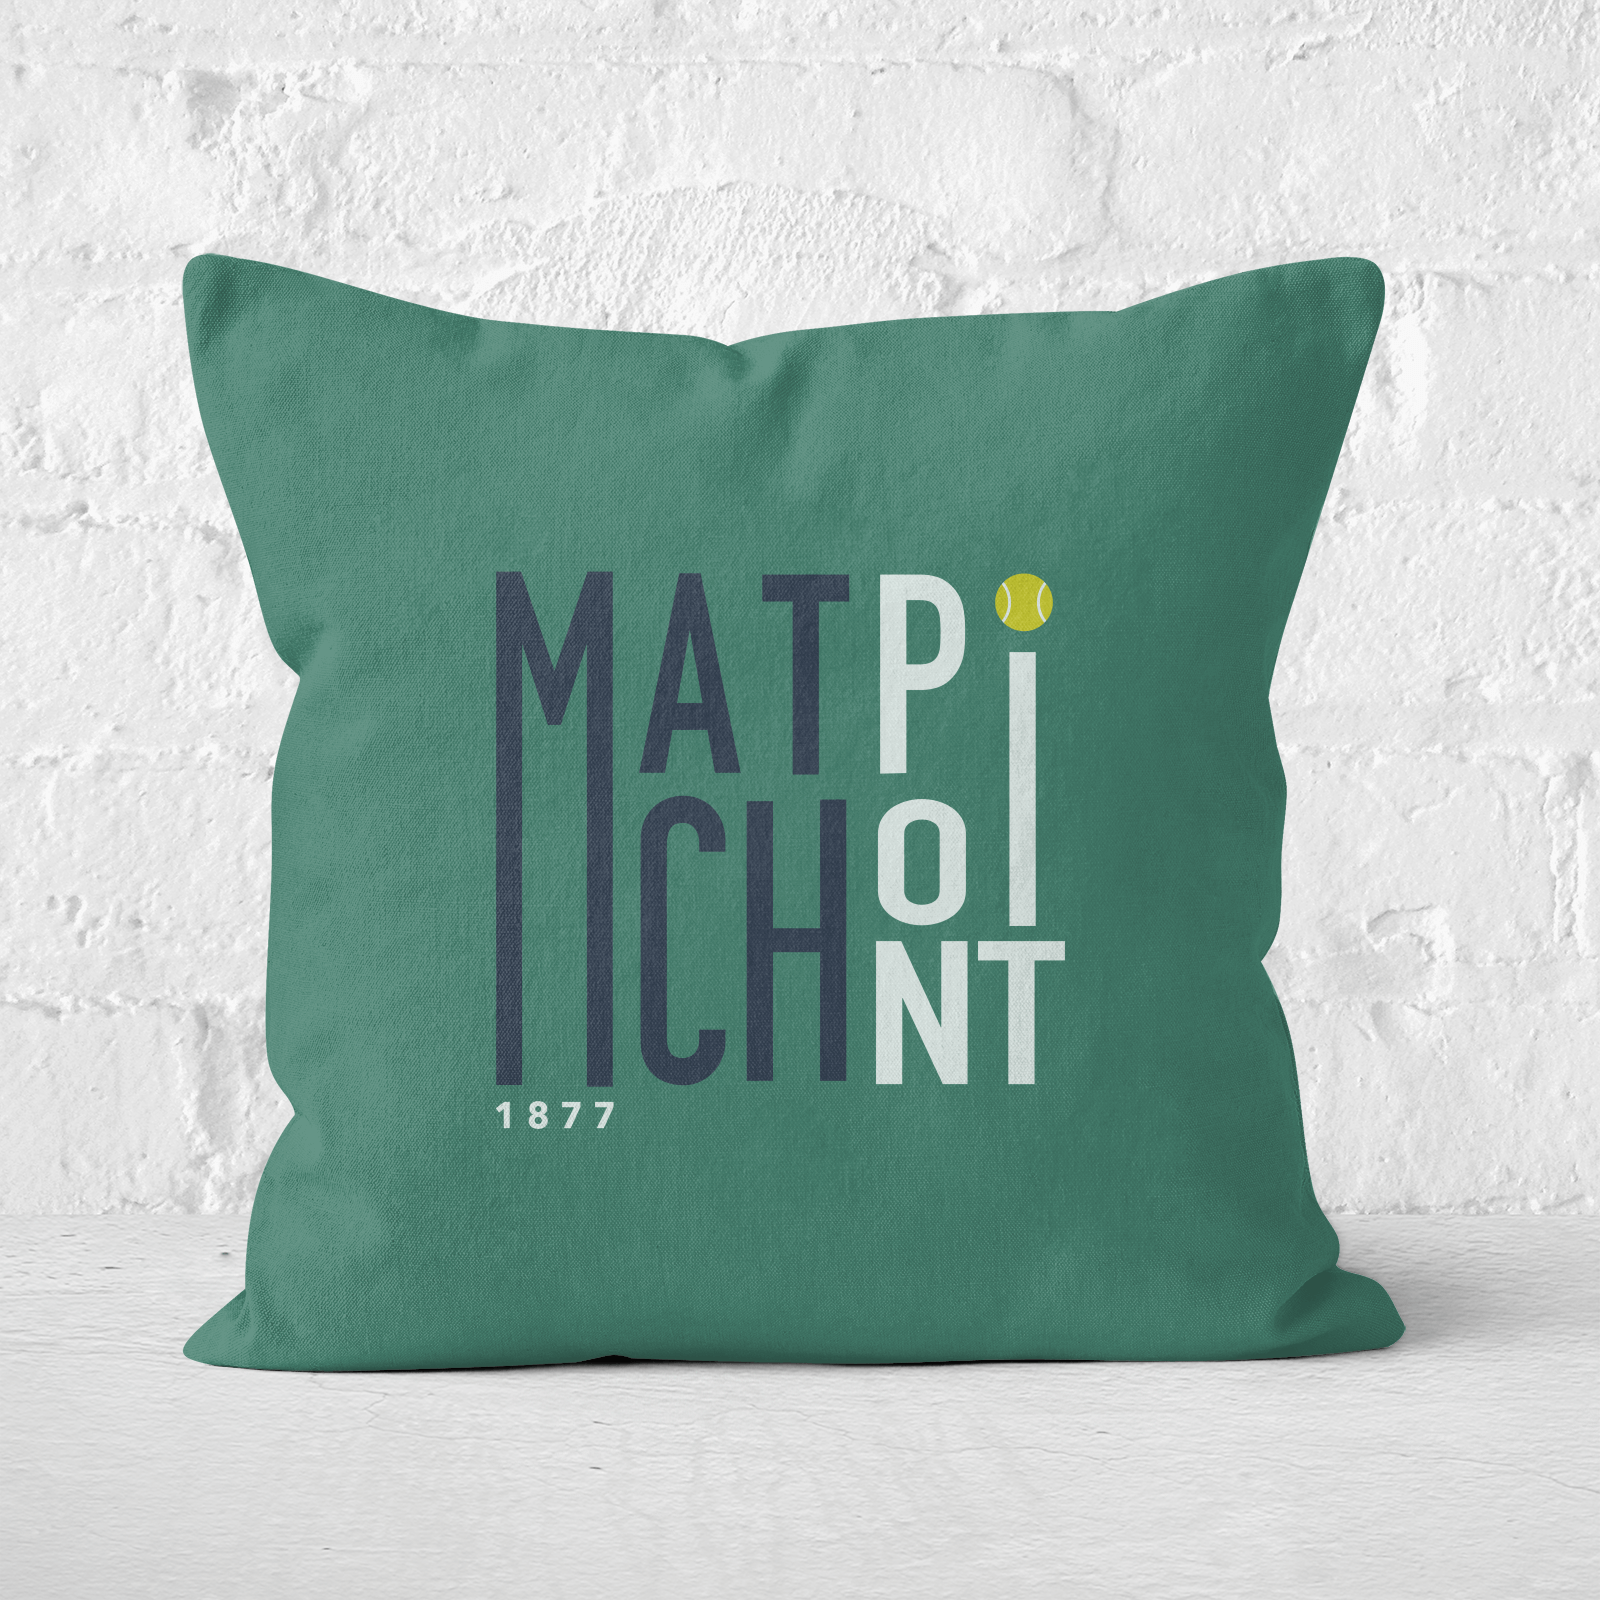 Match Point Square Cushion   50x50cm   Soft Touch